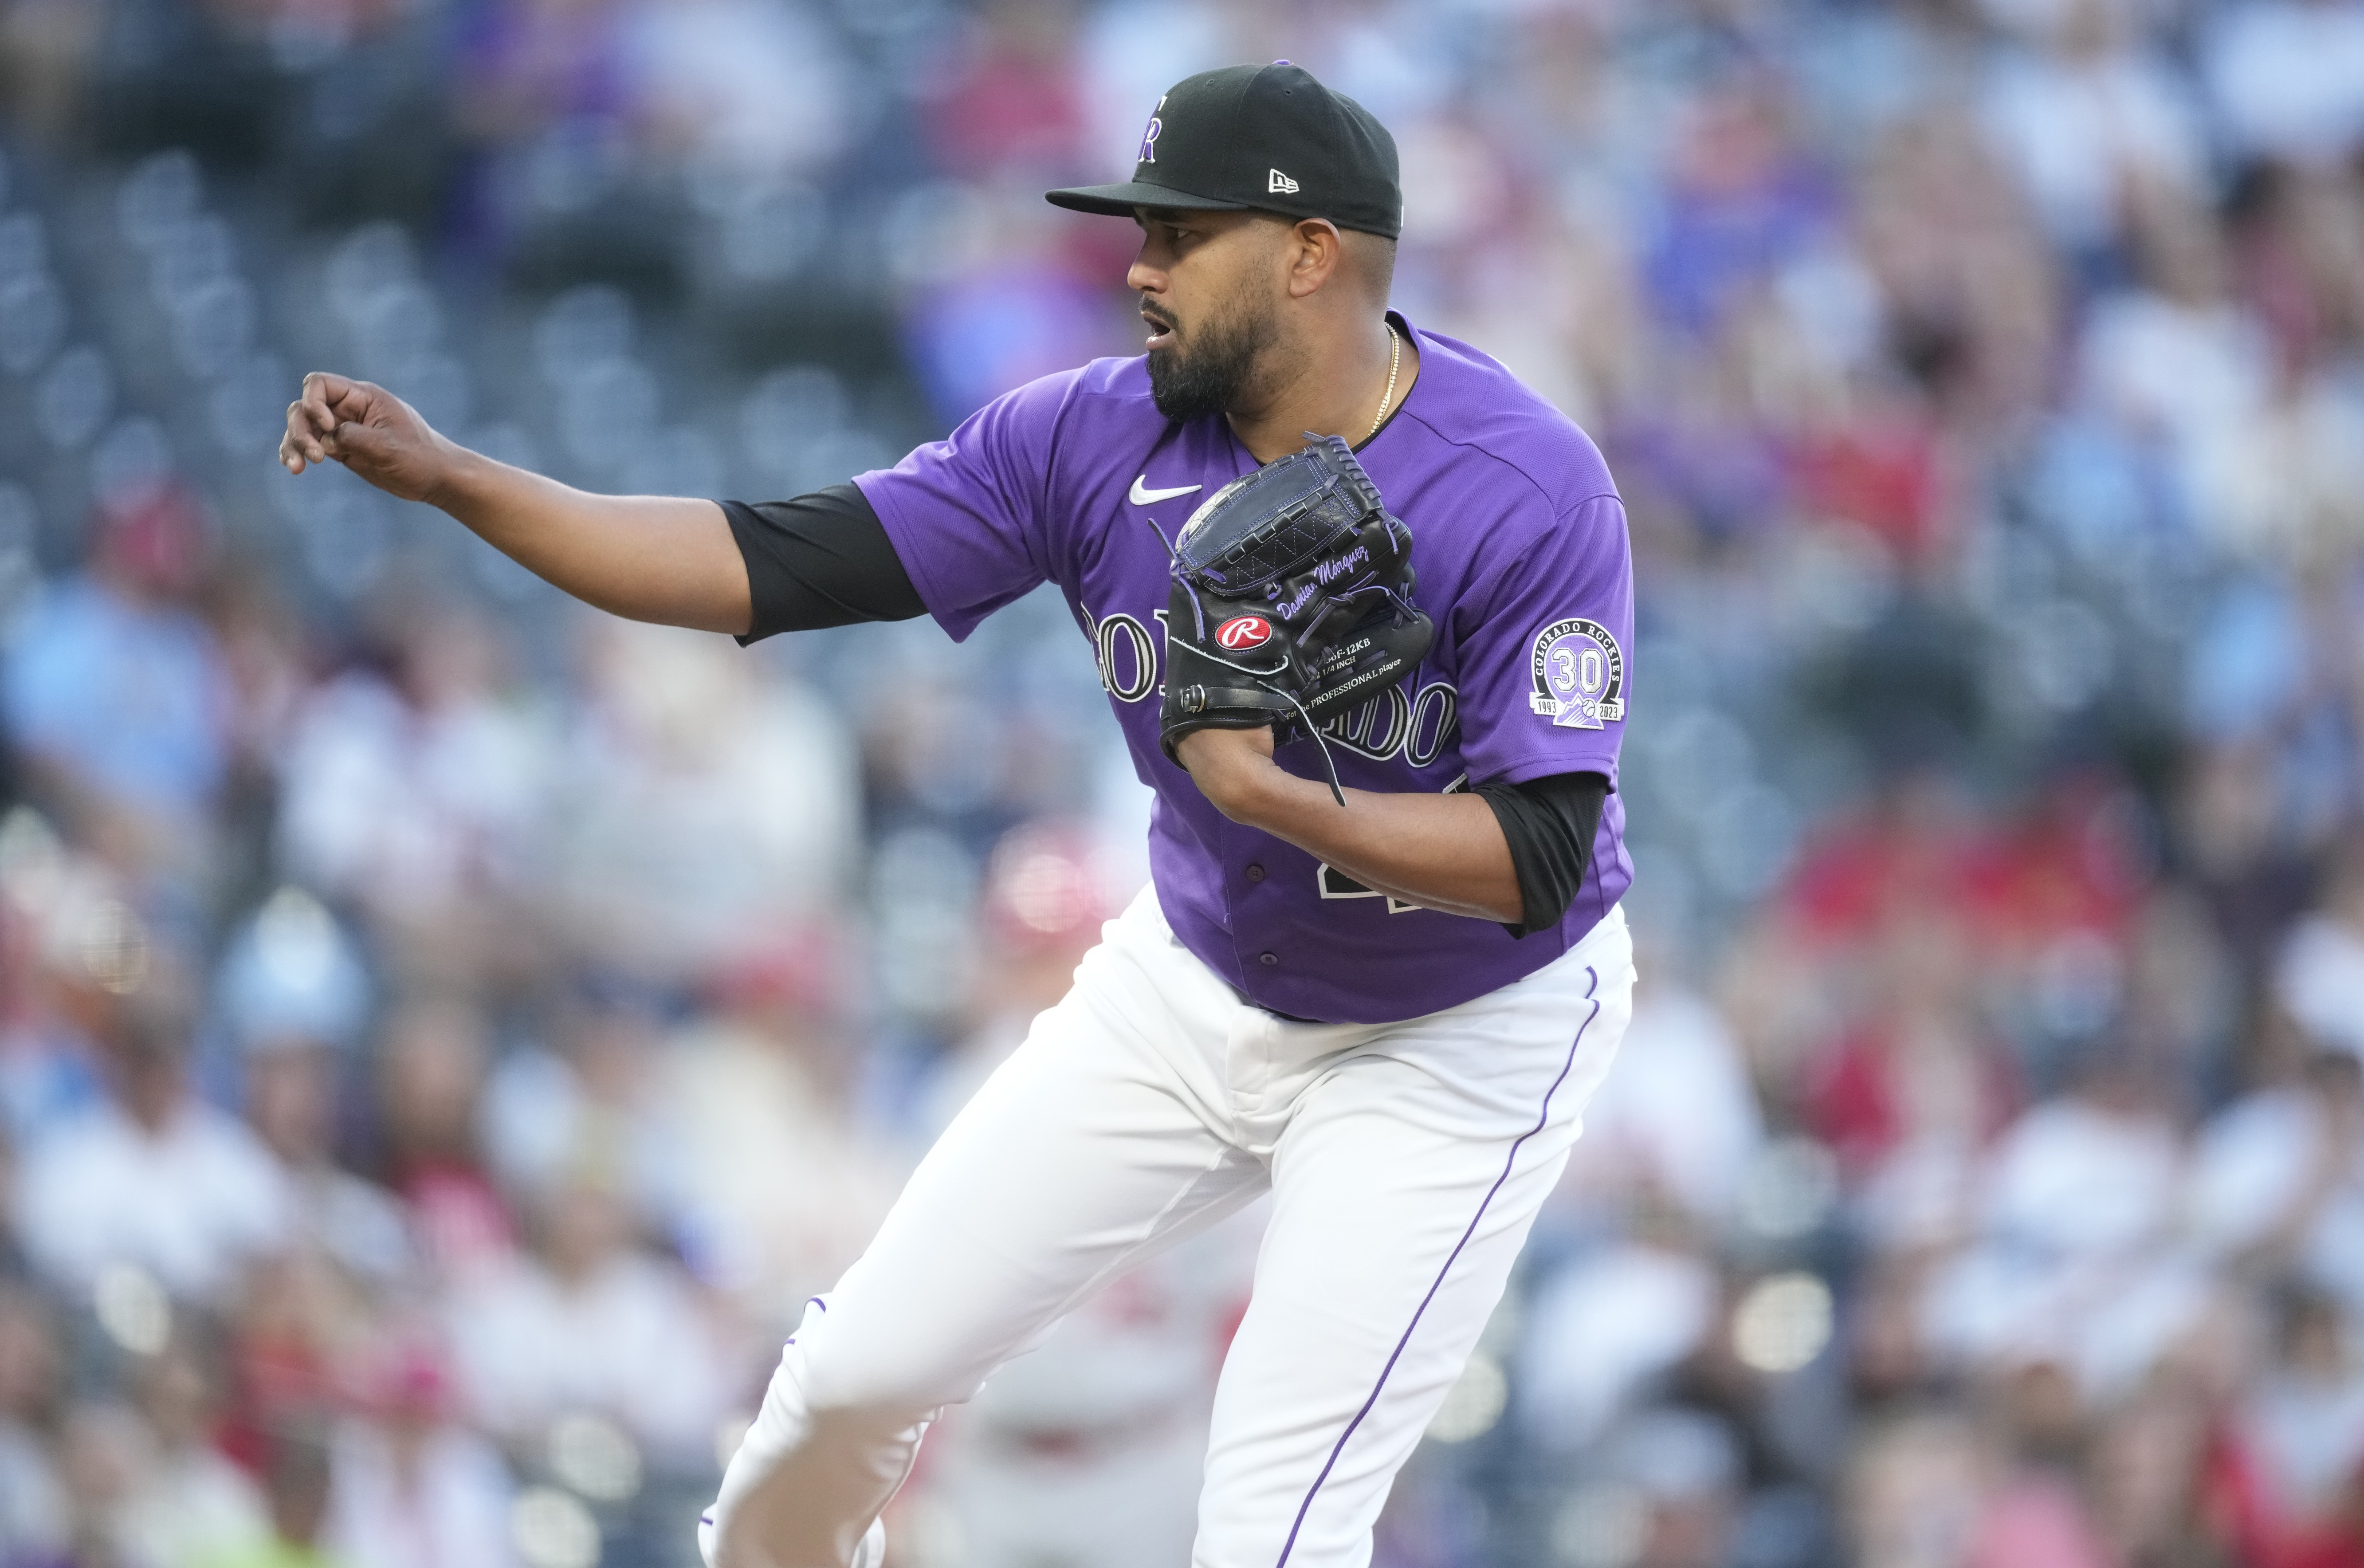 Colorado Rockies starter German Marquez works the first inning against the St. Louis Cardinals Monday, April 10, 2023. (AP Photo/David Zalubowski)